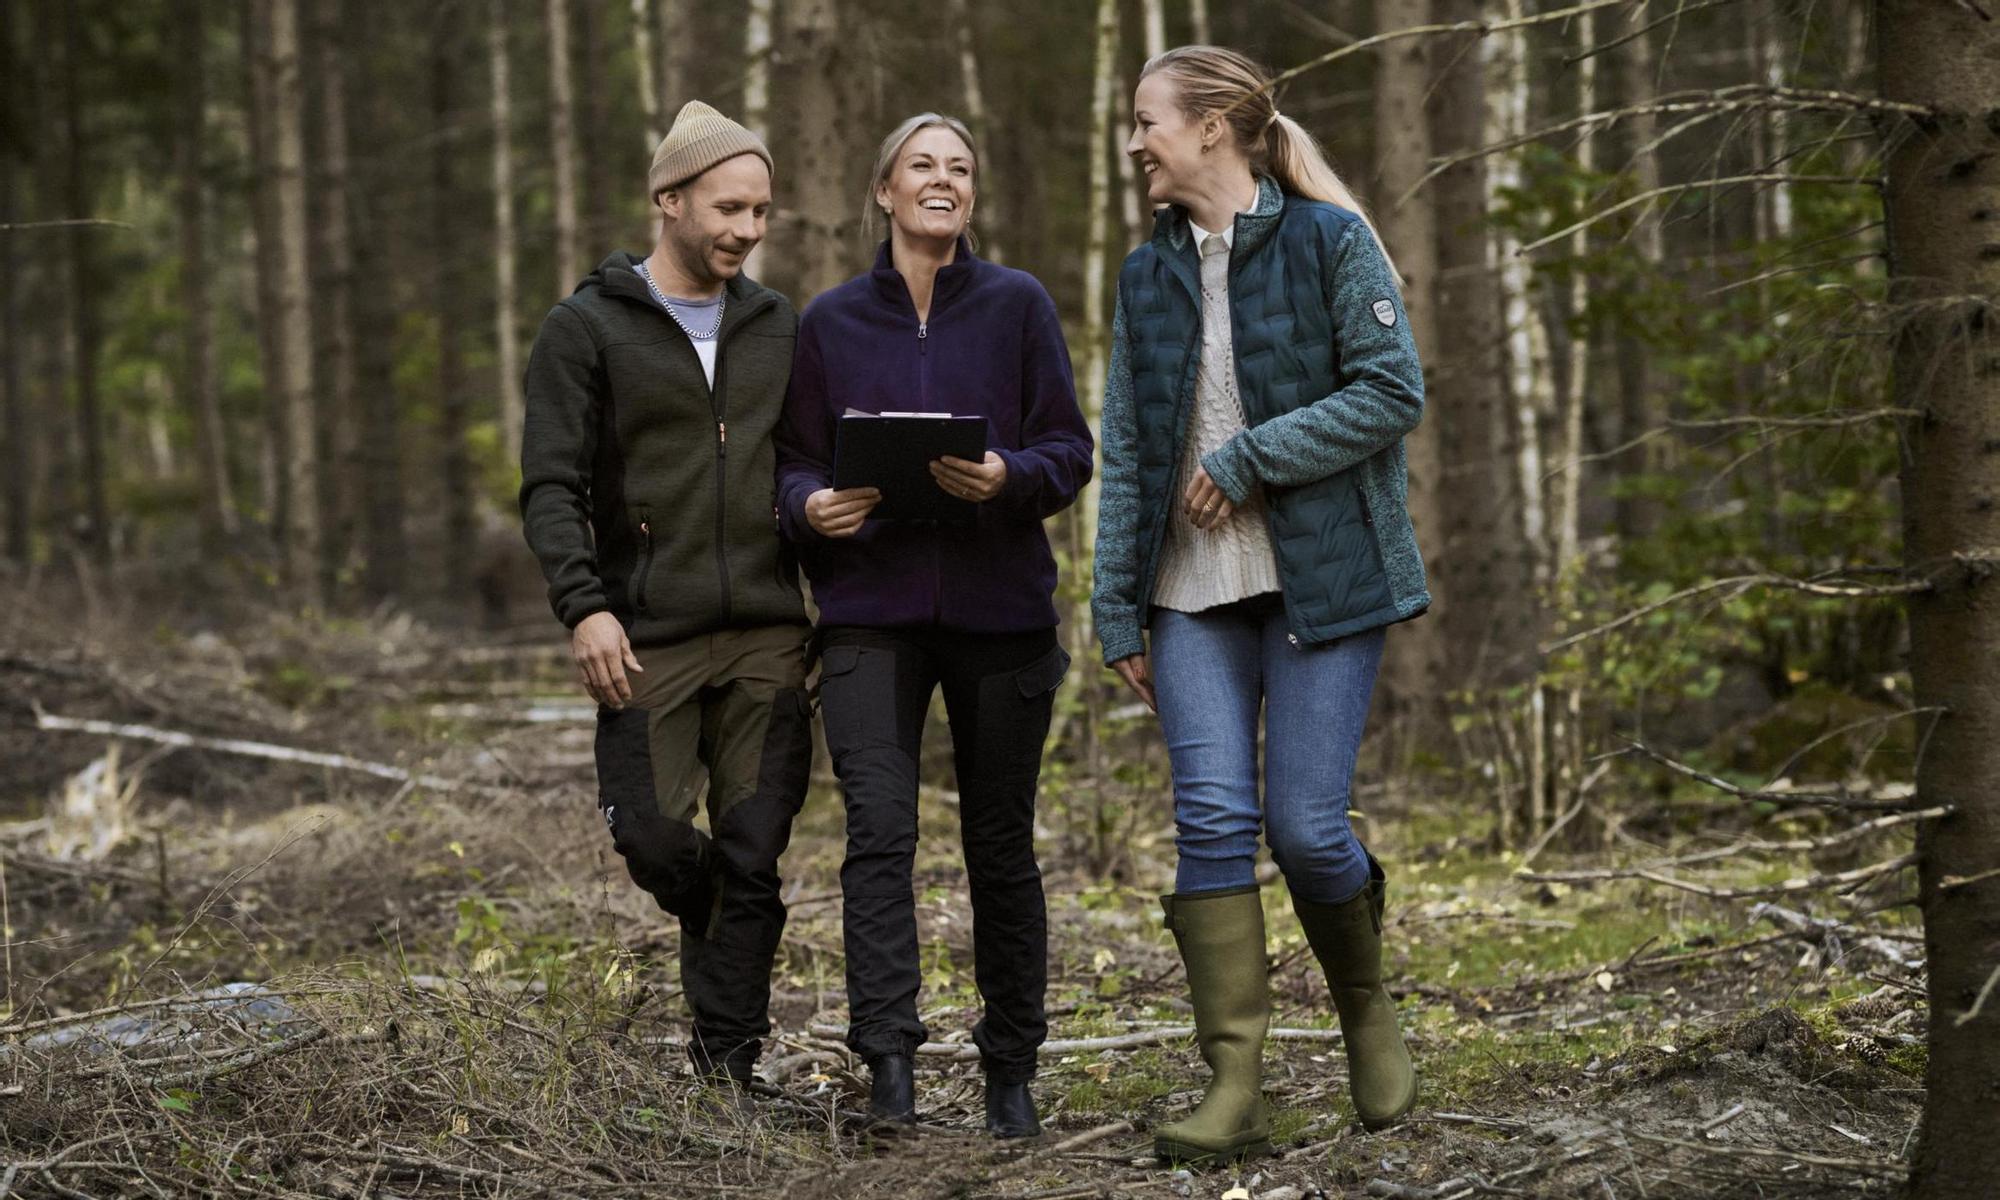 Three people having a forest meeting